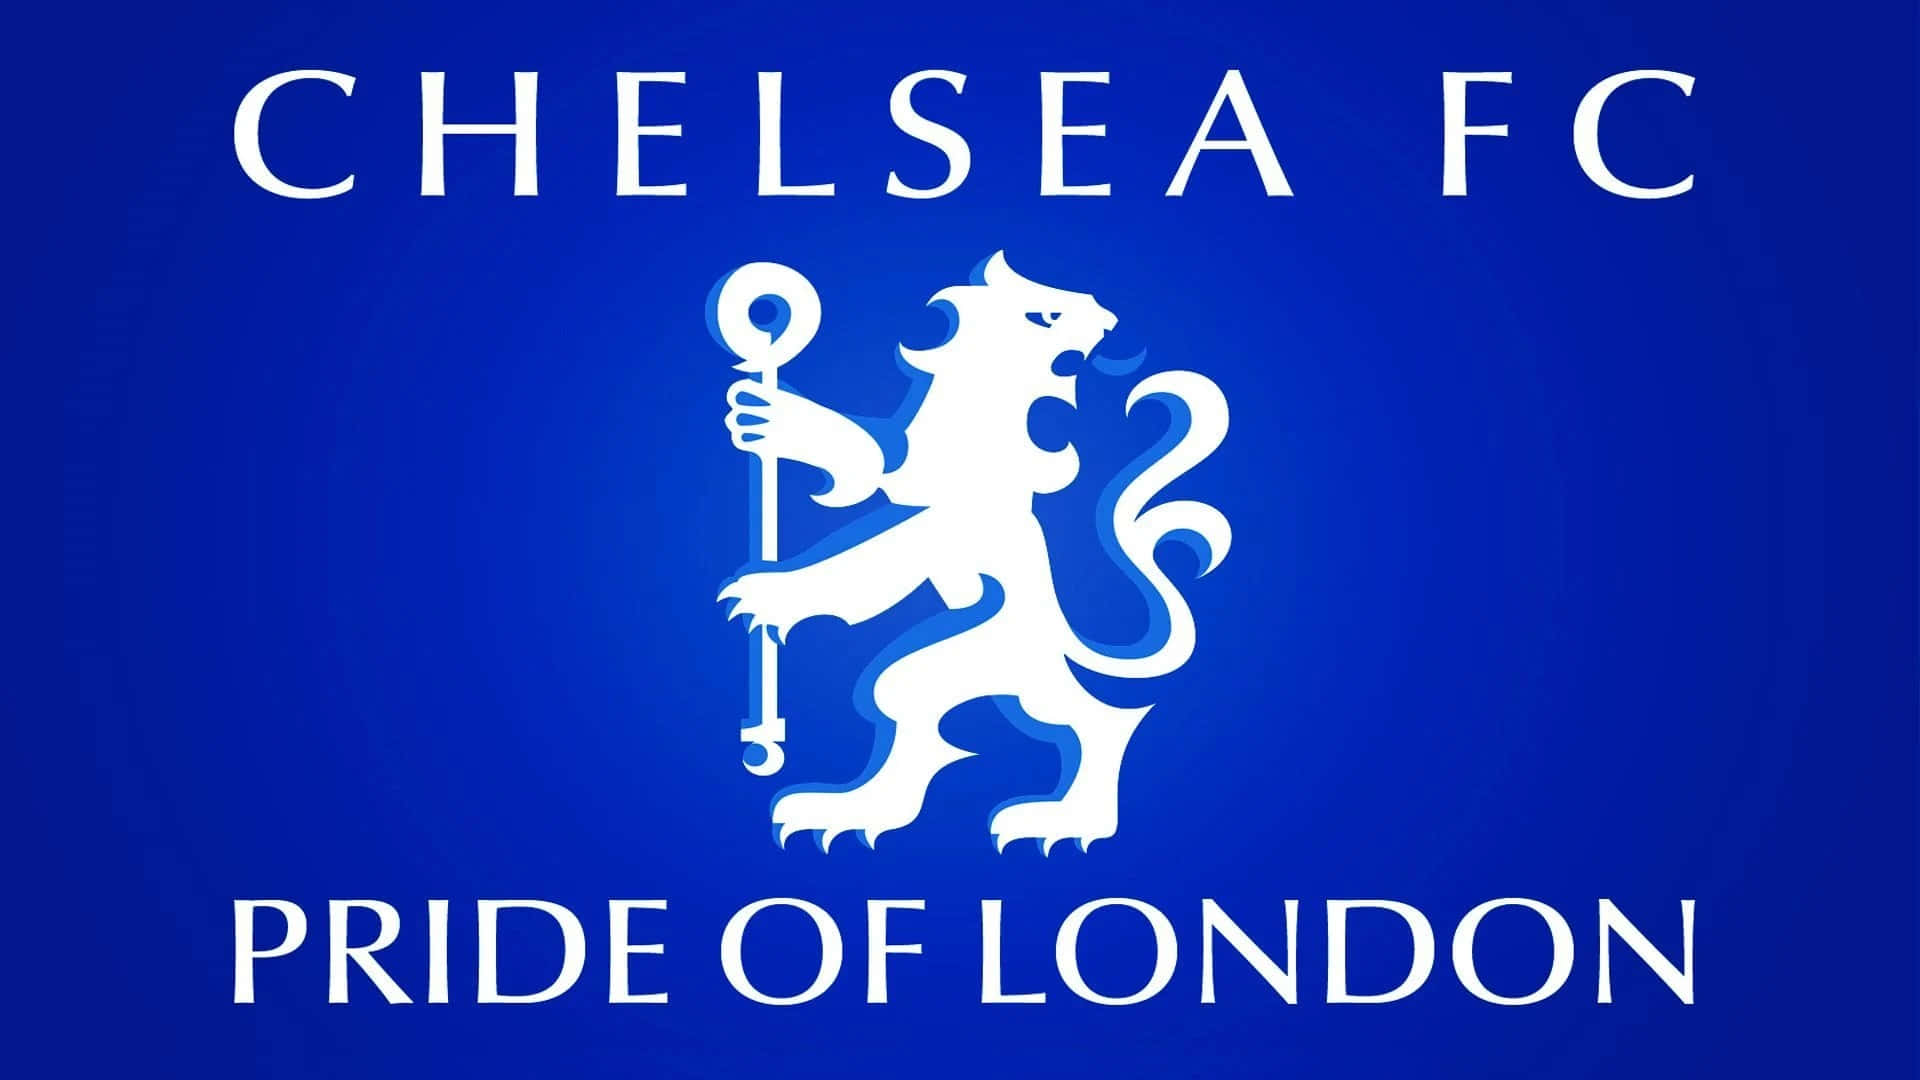 "Welcome to Chelsea, the heart of London!"